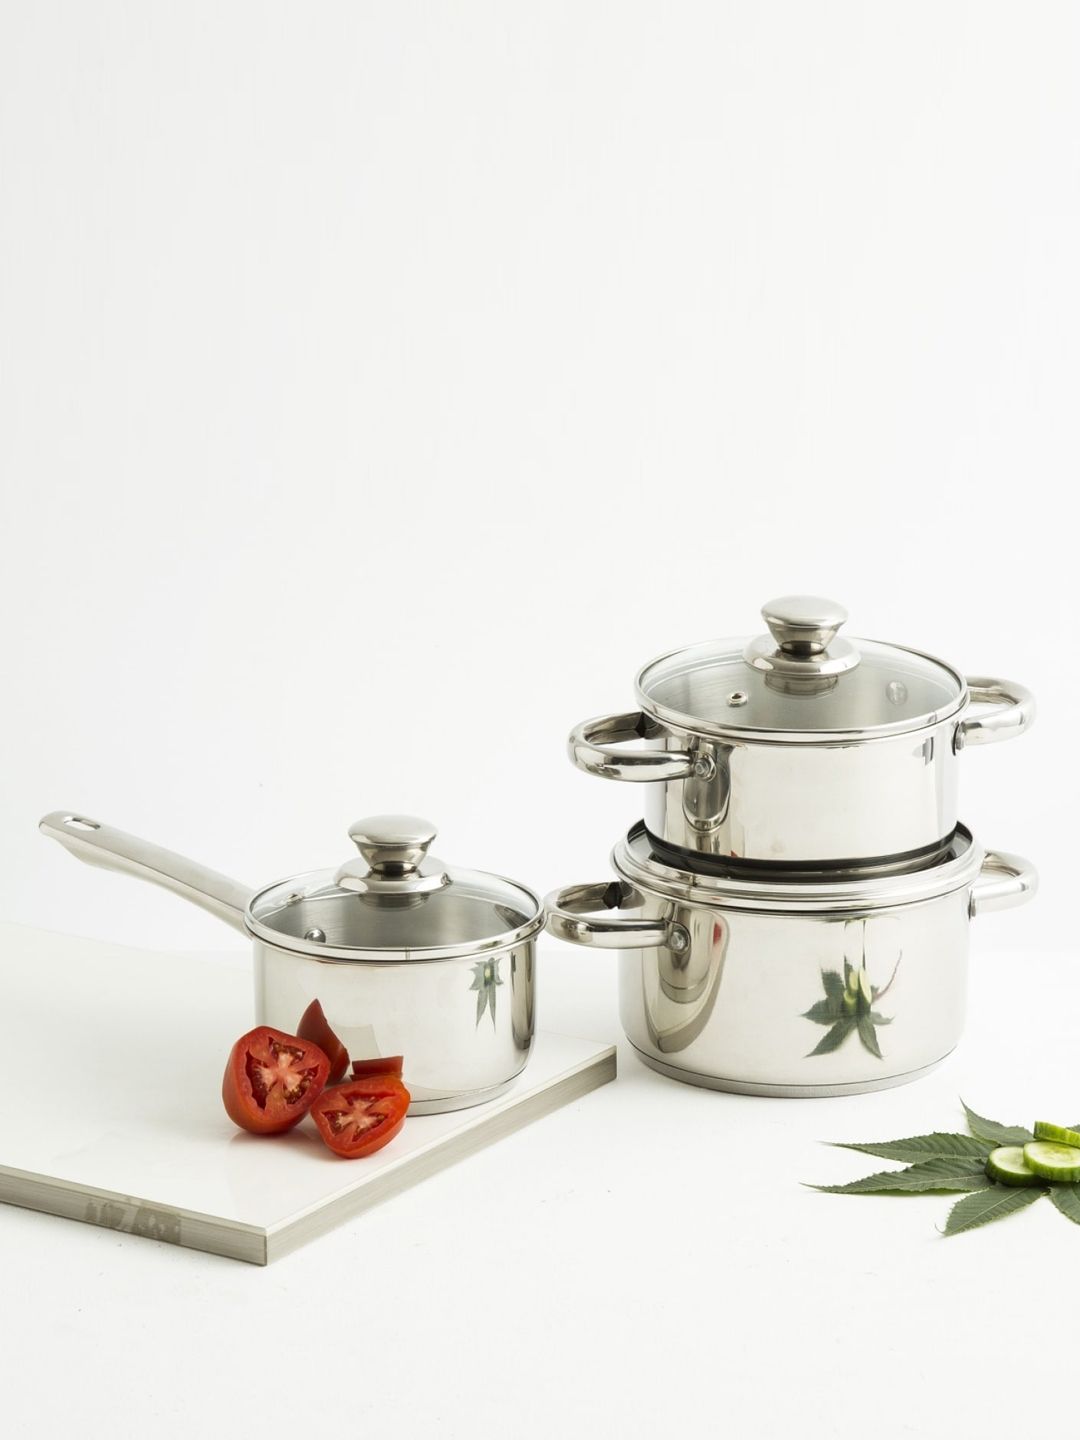 Home Centre Set of 6 Silver-Toned Stainless Steel Cookwares Price in India